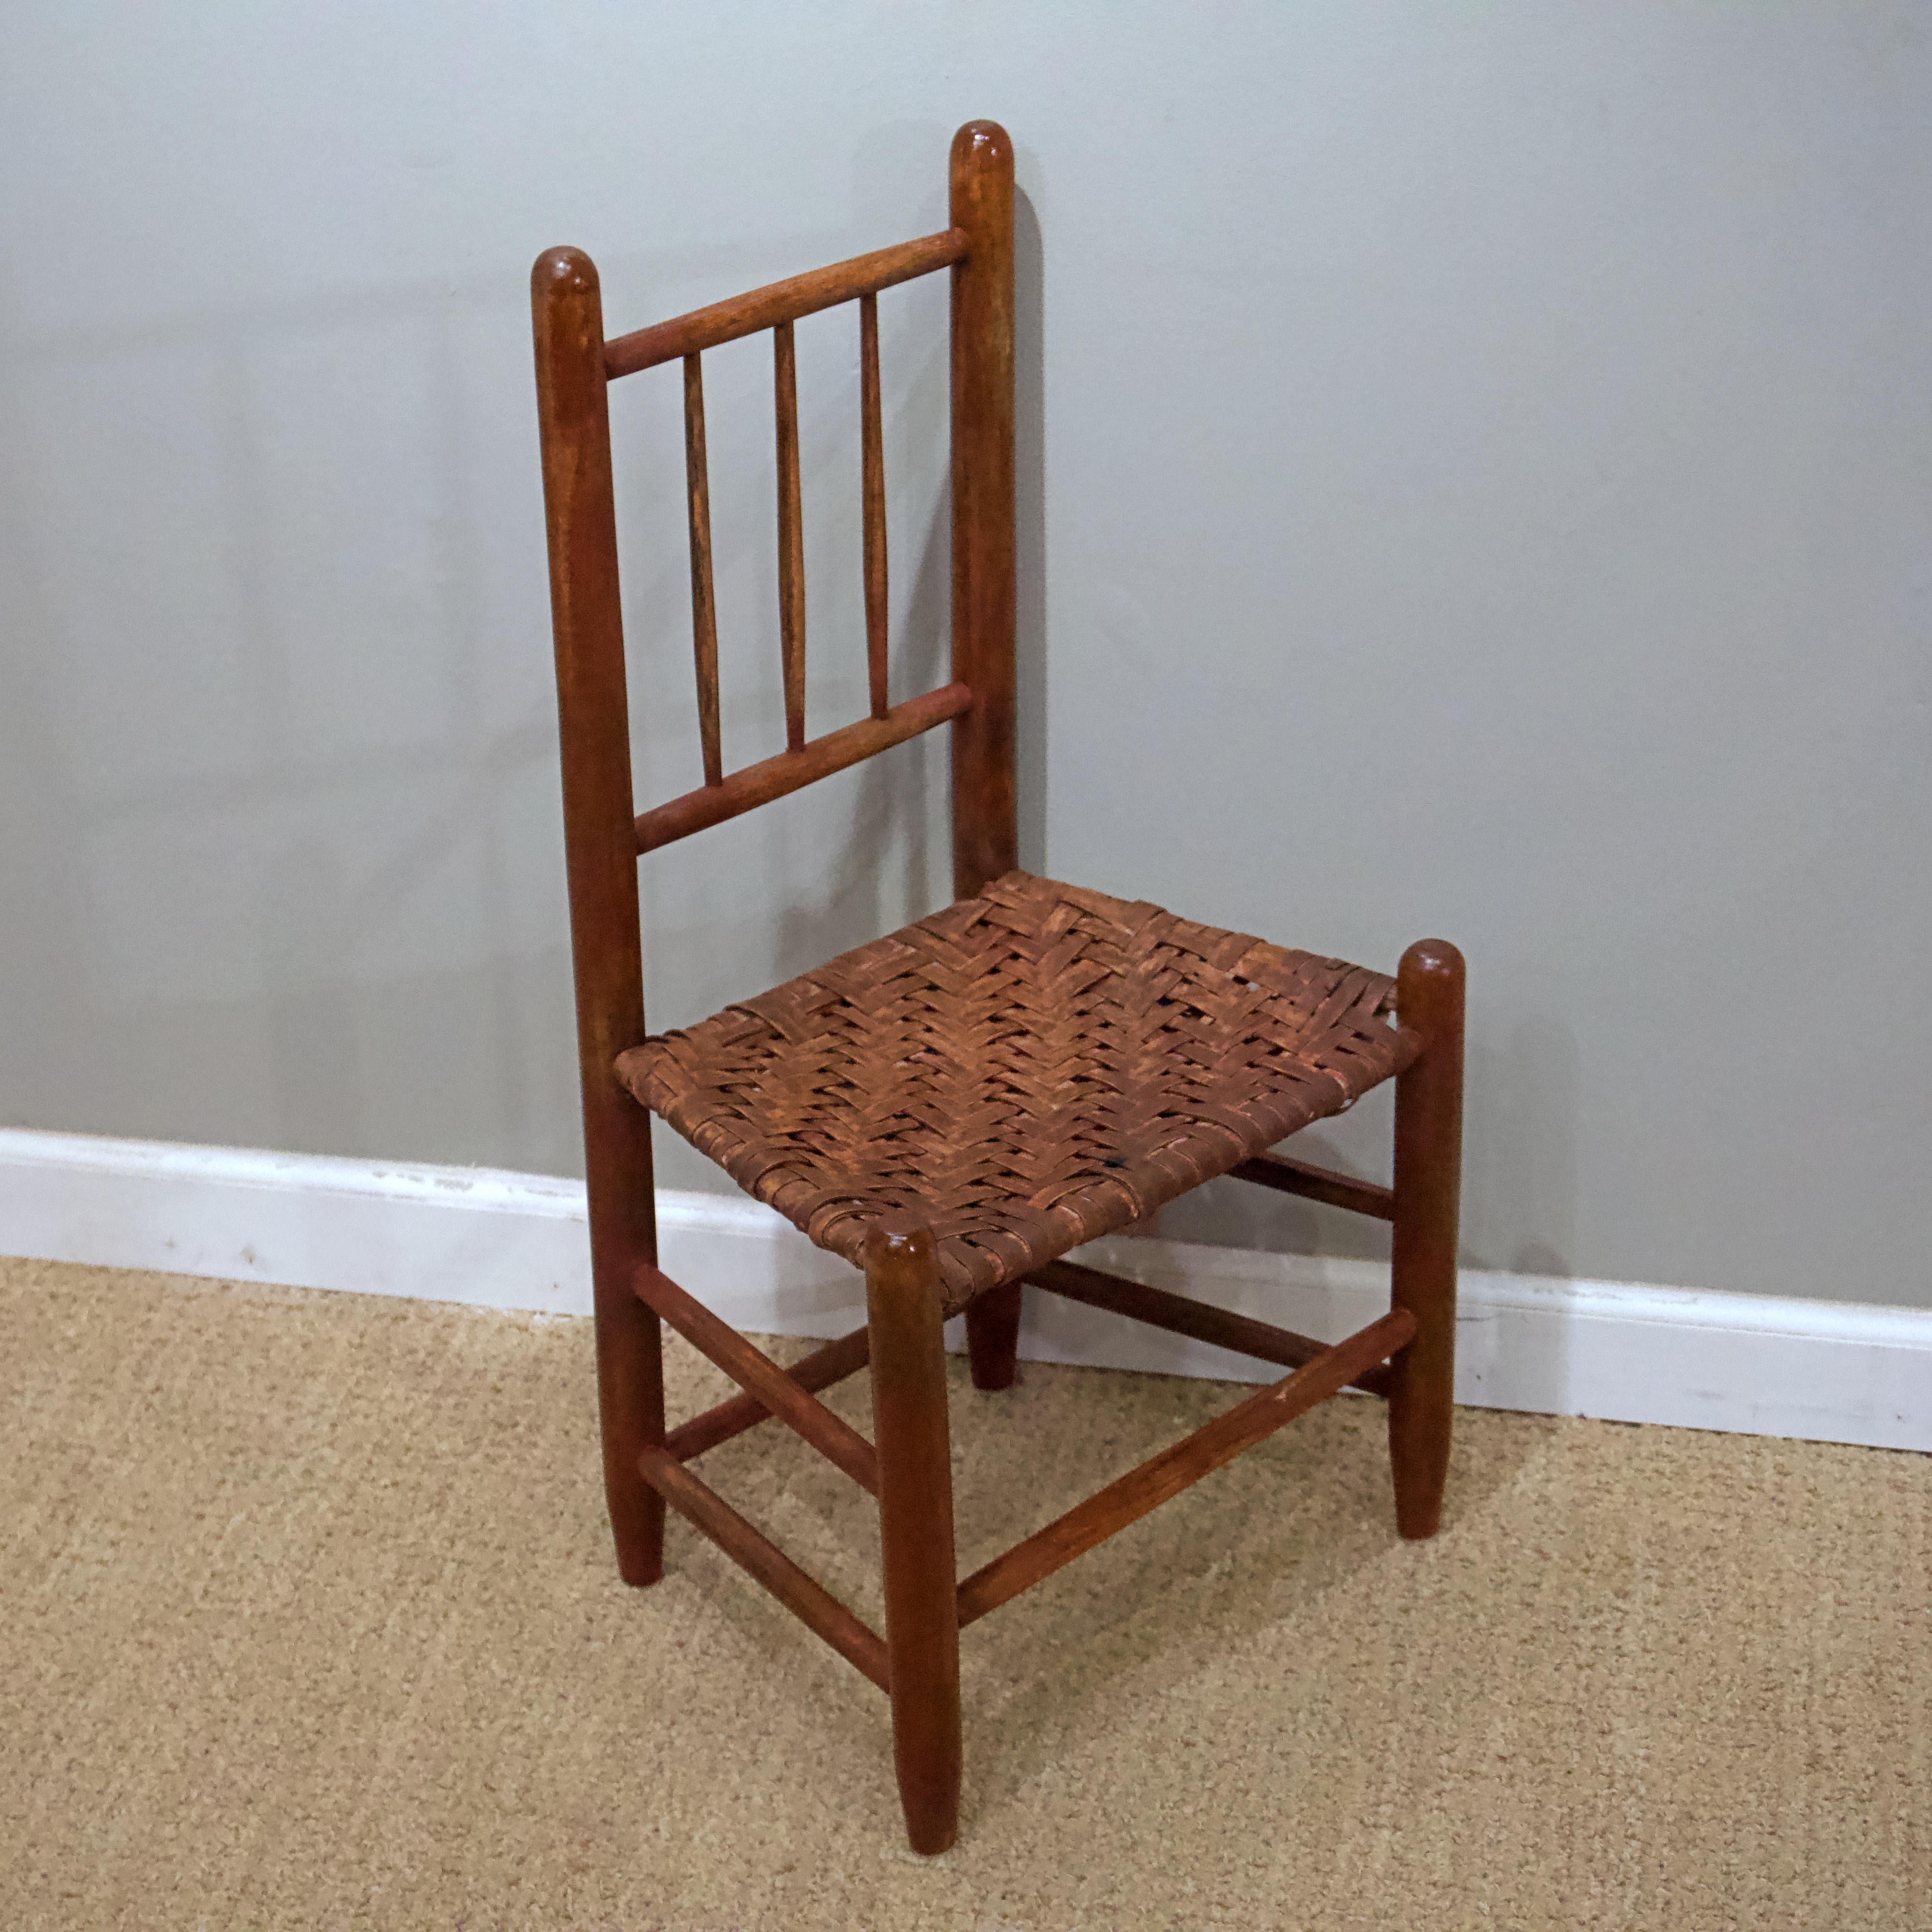 With flat reed or basket weave seat.